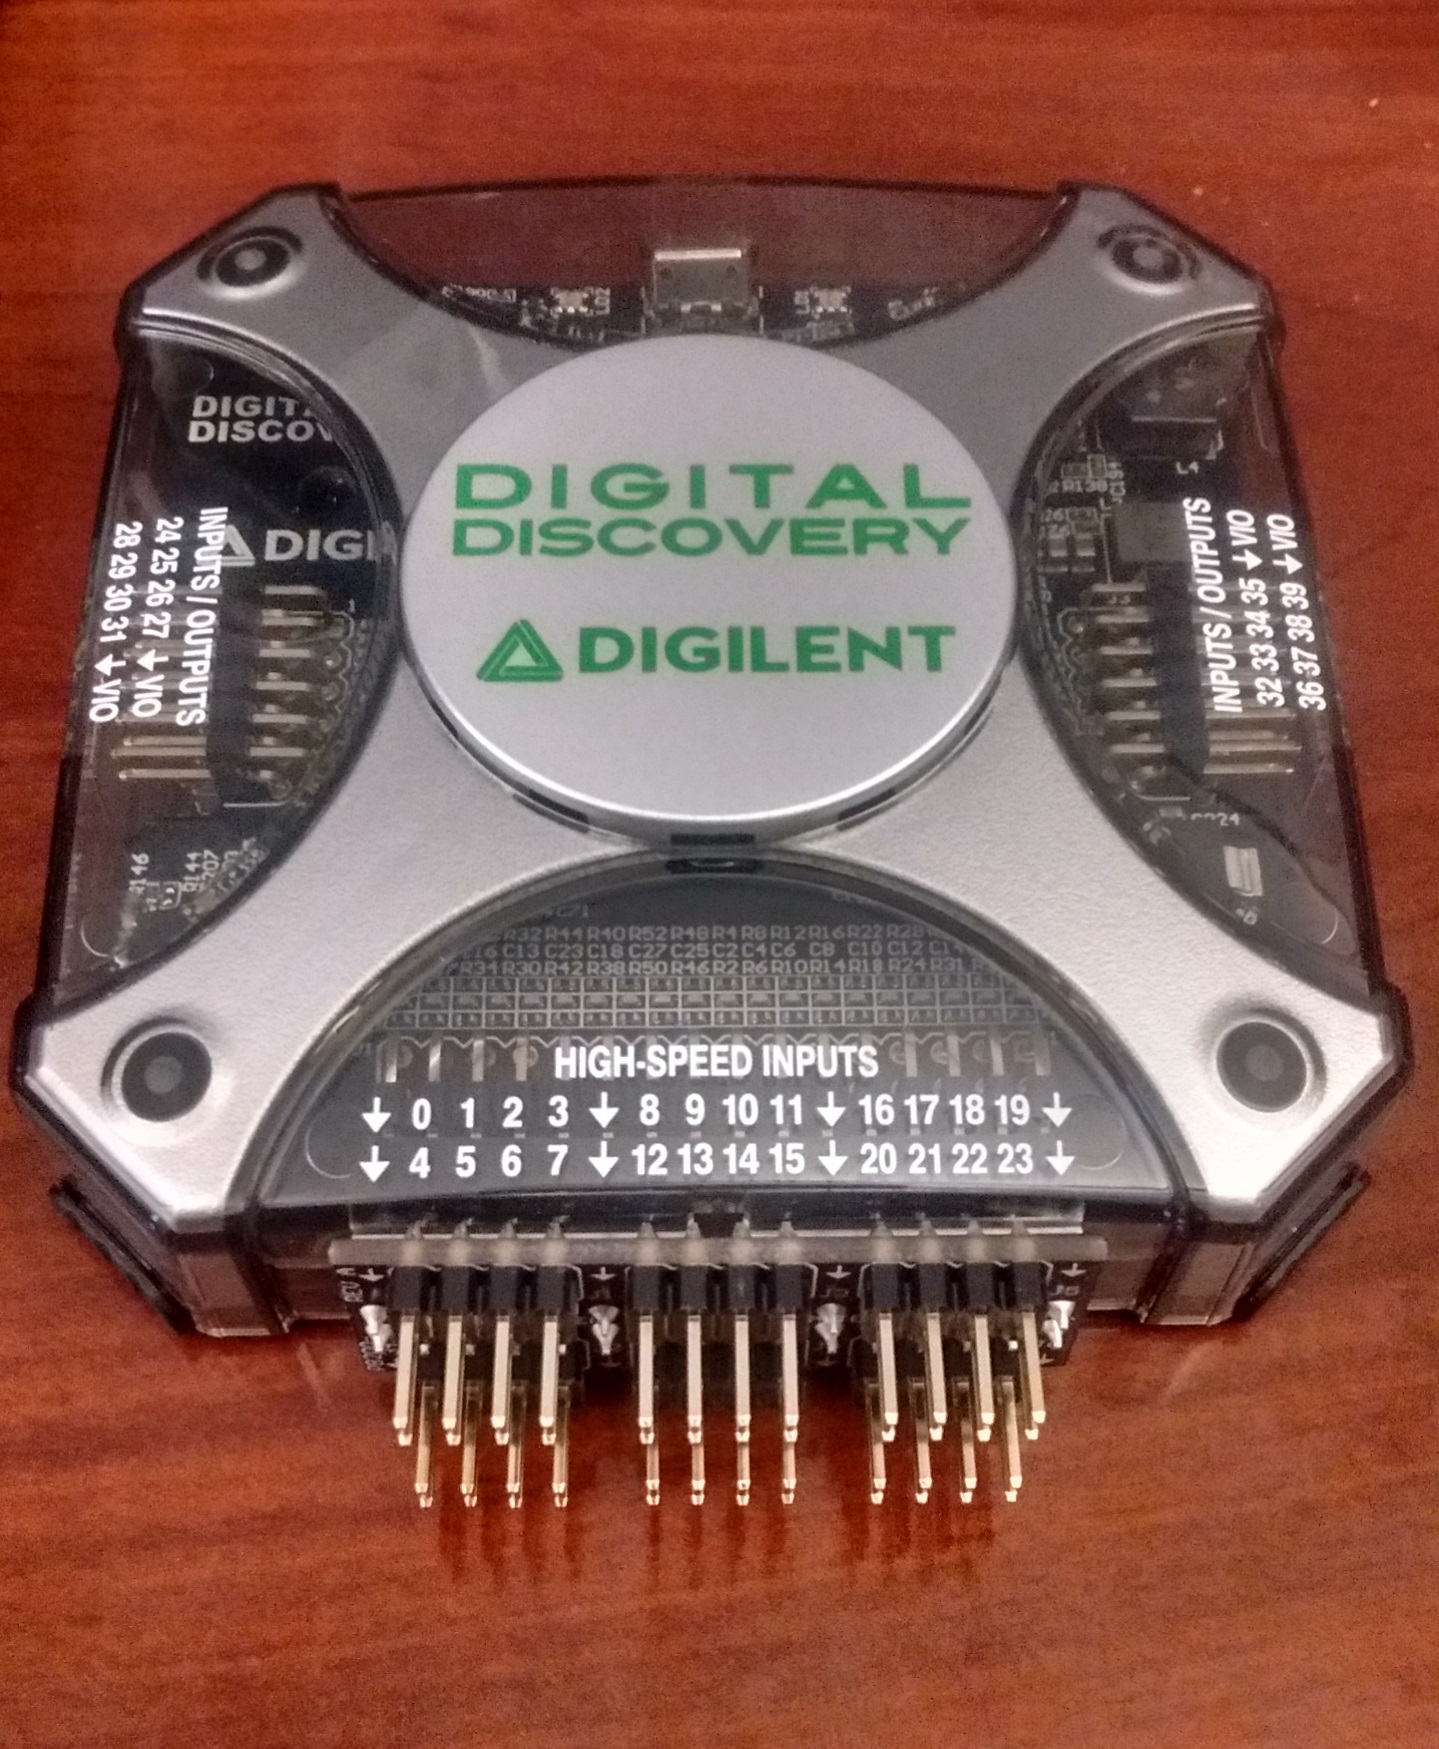 Using the High Speed Adapter with the Digital Discovery - Digilent 